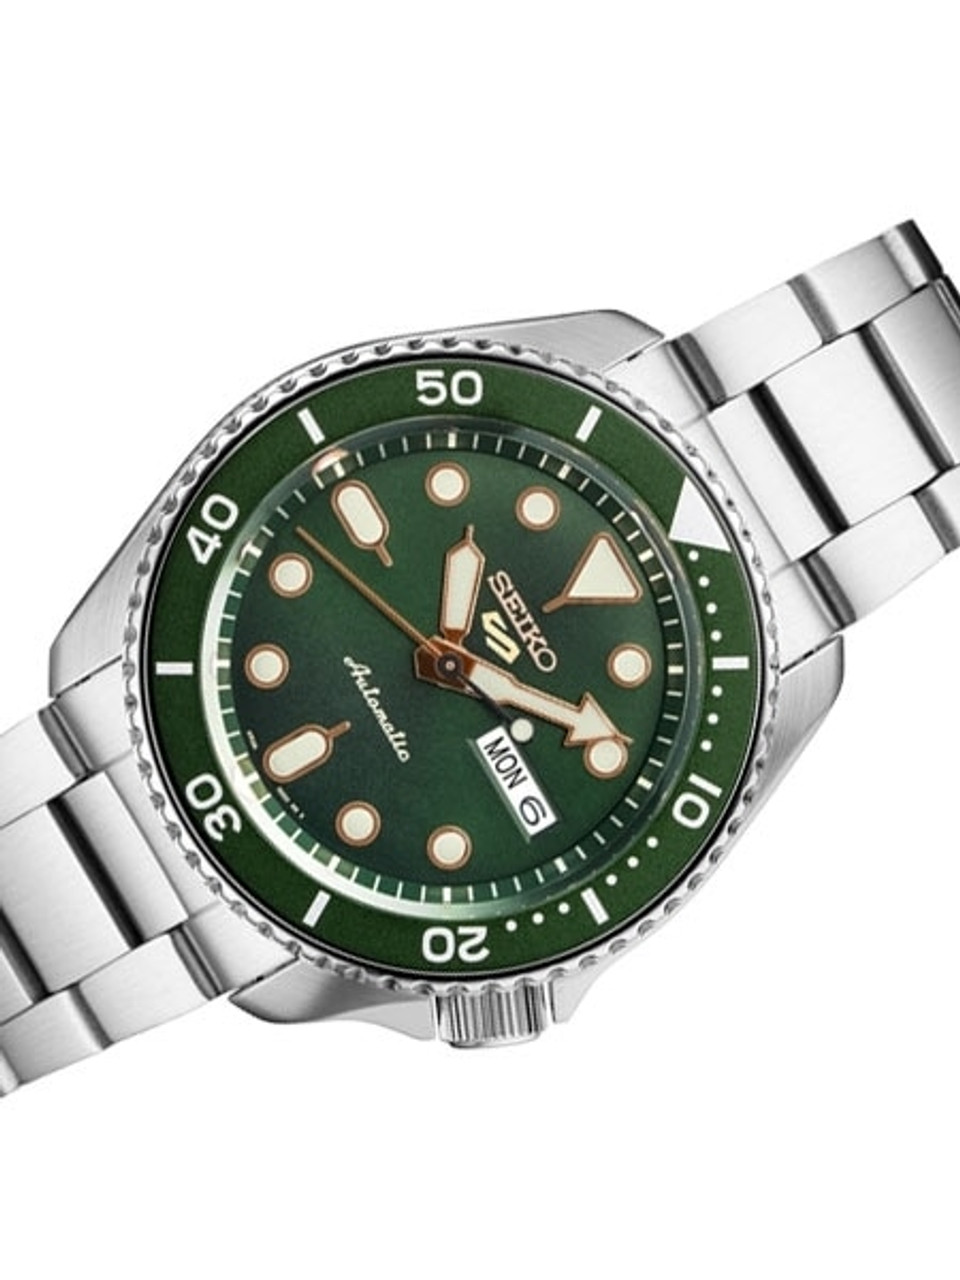 Seiko 5 Sports Automatic 24-Jewel Watch with Green Dial #SRPD63